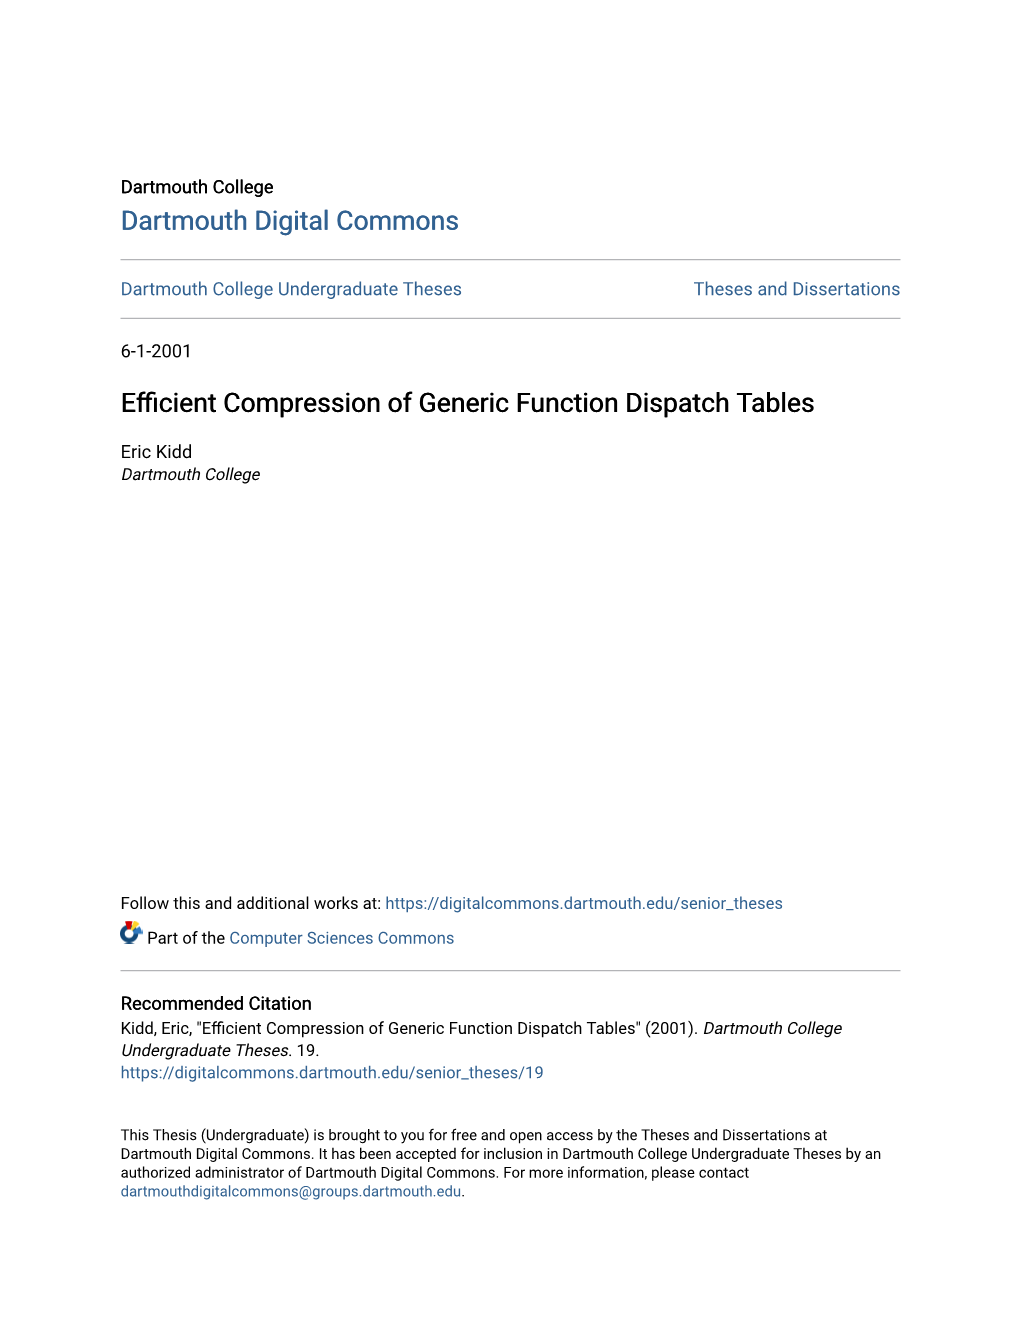 Efficient Compression of Generic Function Dispatch Tables